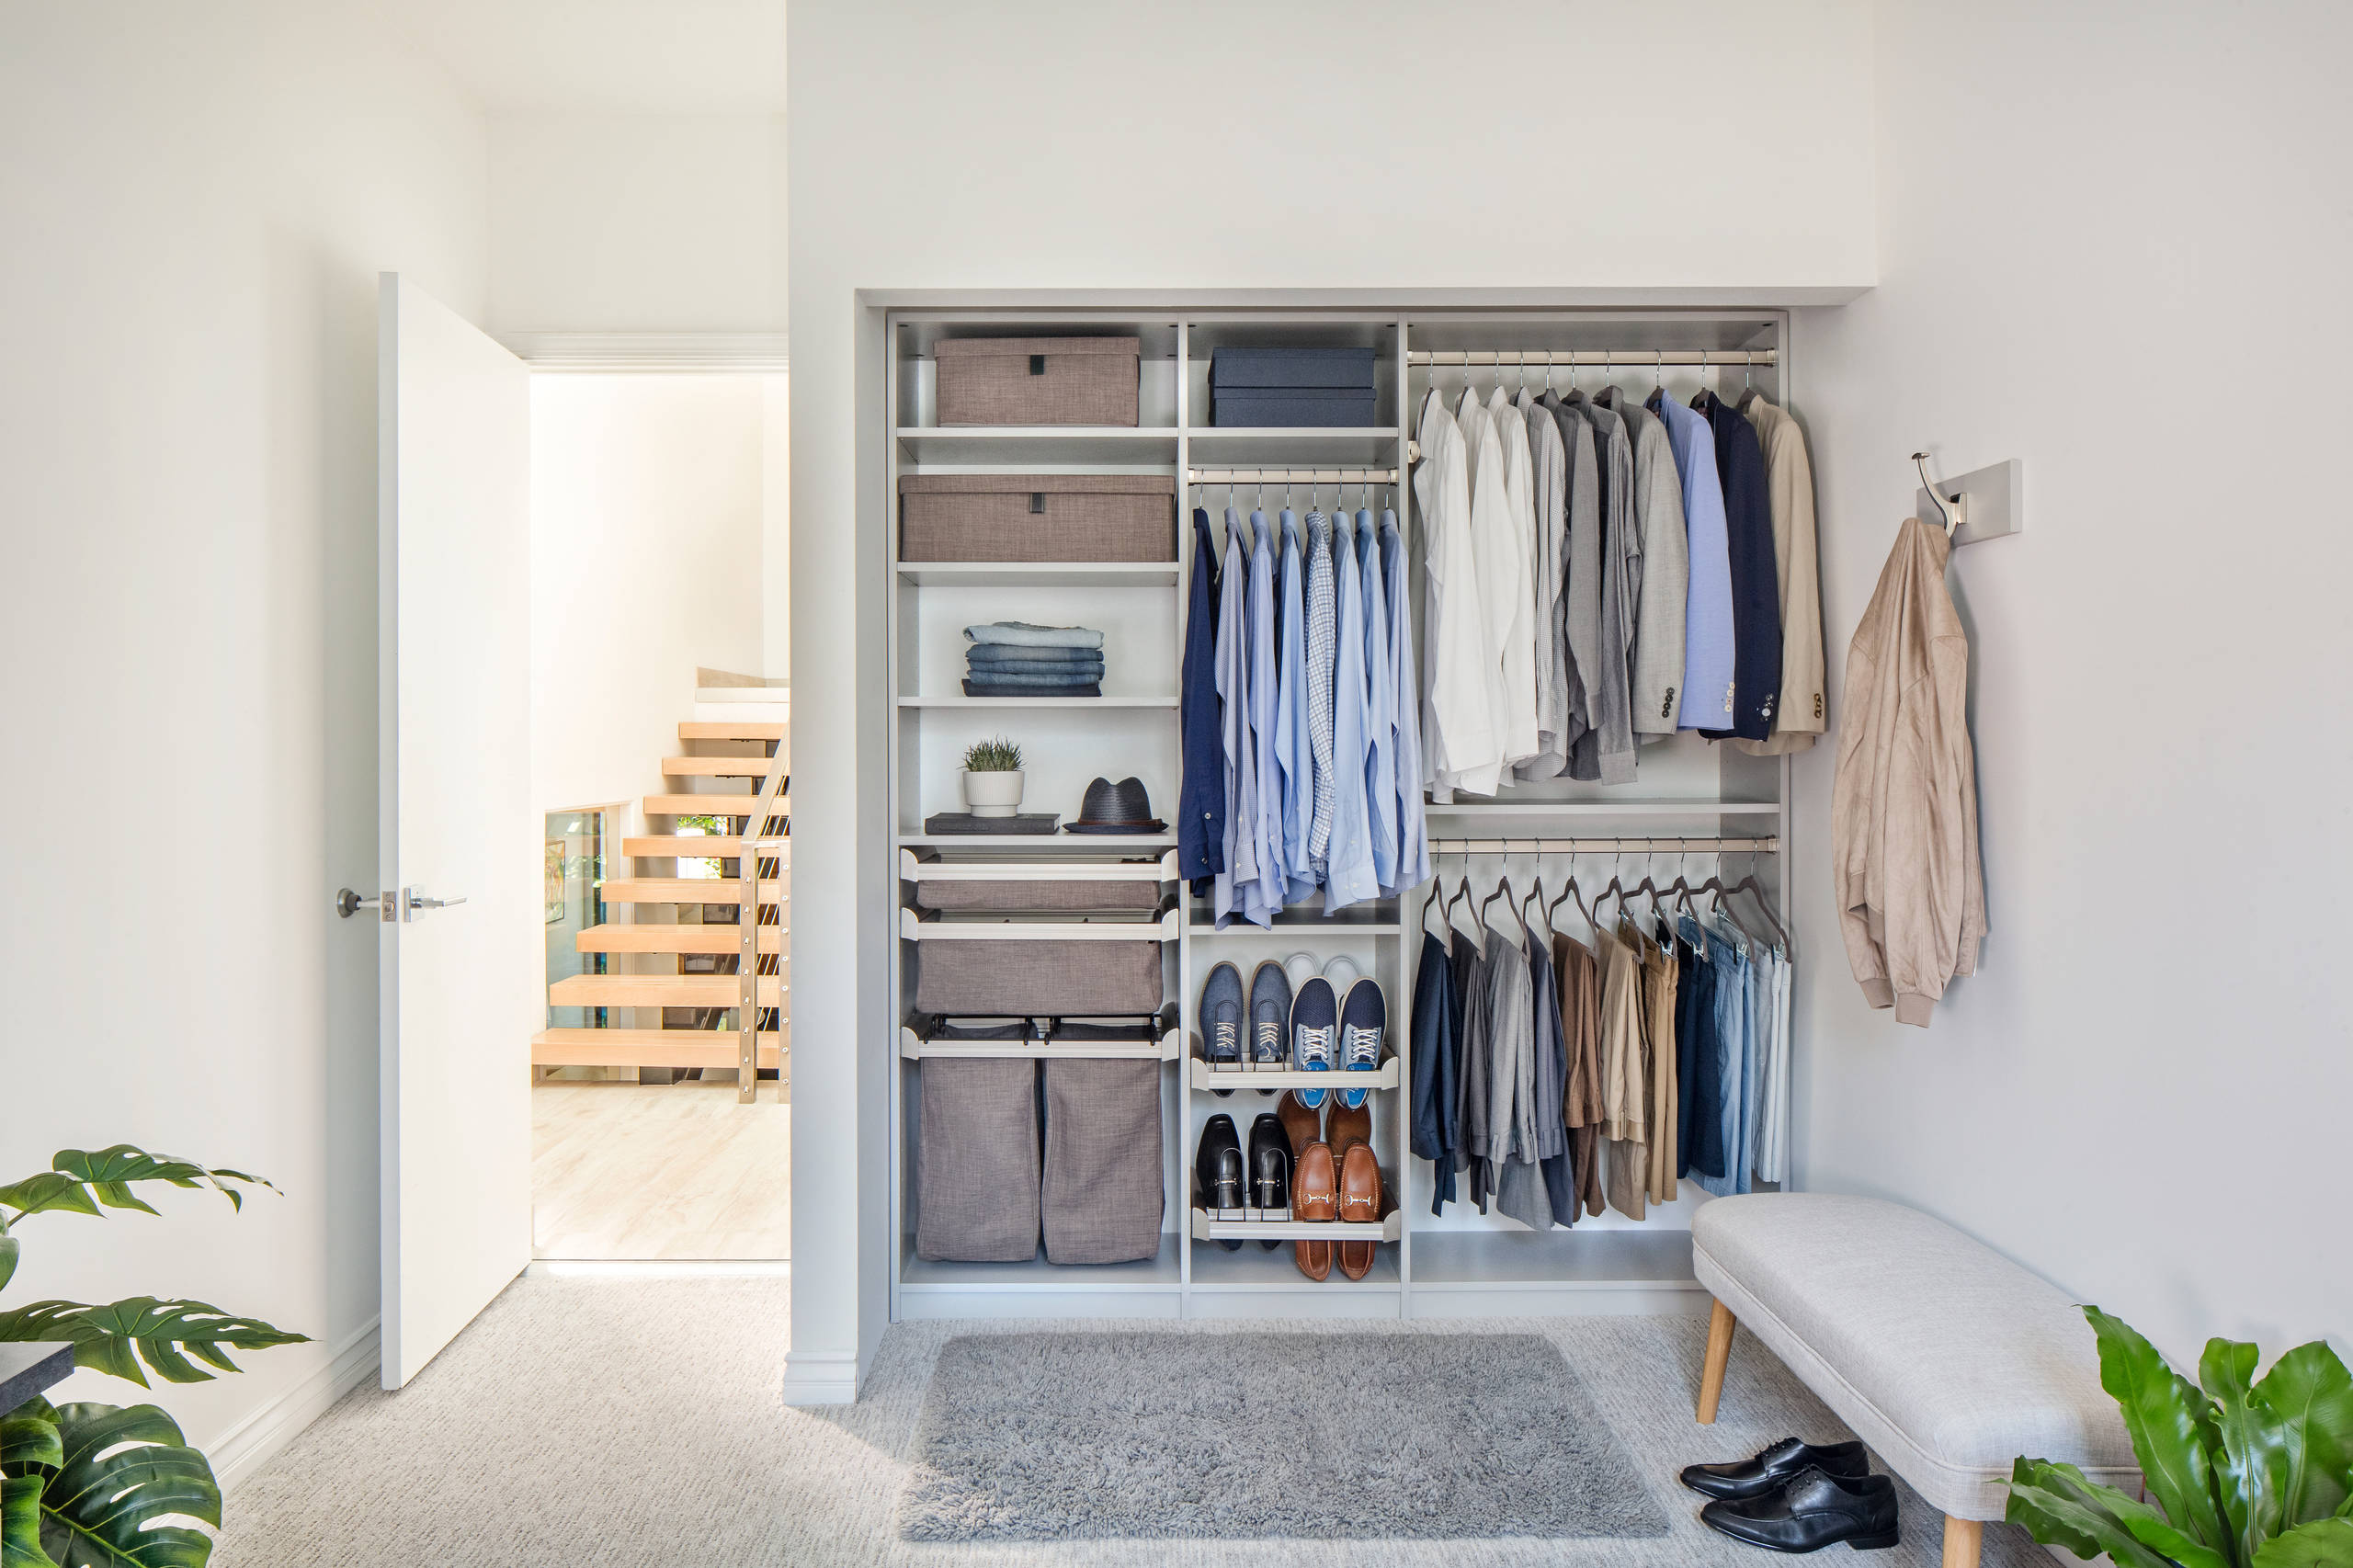 https://st.hzcdn.com/simgs/pictures/closets/custom-closets-tailored-living-of-princeton-img~654198a00a7ceaf2_14-7075-1-42396cc.jpg